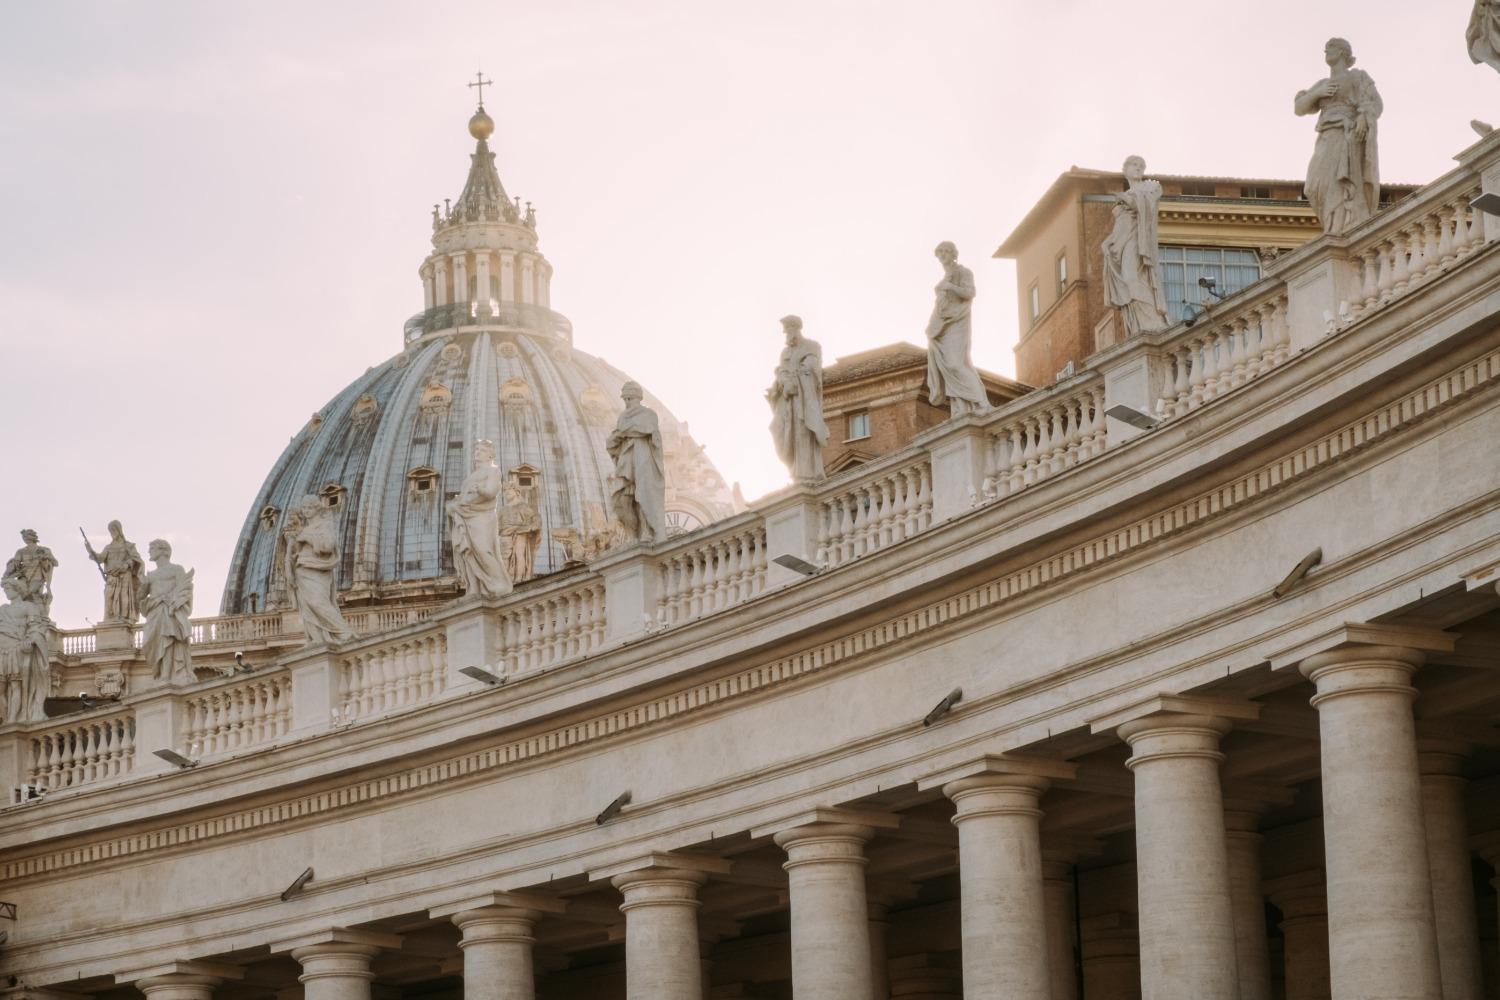 The cupola of St. Peter&#039;s Basilica rises over statues of saints on the colonnade